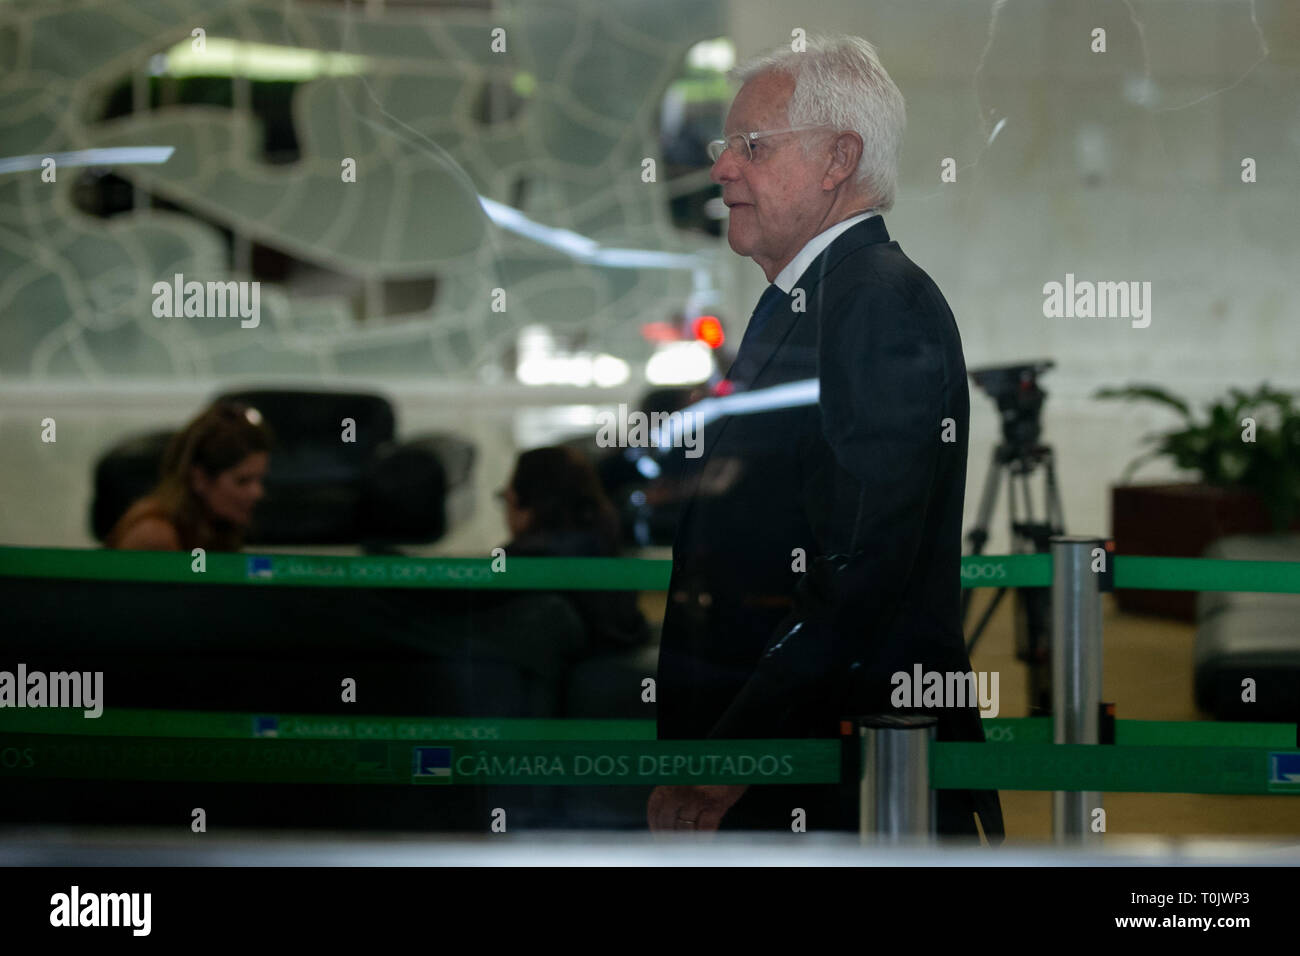 BRASÍLIA, DF - 20.03.2019: EX MINISTRO MOREIRA FRANCO - Moreira Franco, chief minister of the General Secretariat of the Presidency and later Minister of Mines and Energy in the government Michel Temer 03-20-2019 (Photo: Myke Sena/Fotoarena) Stock Photo